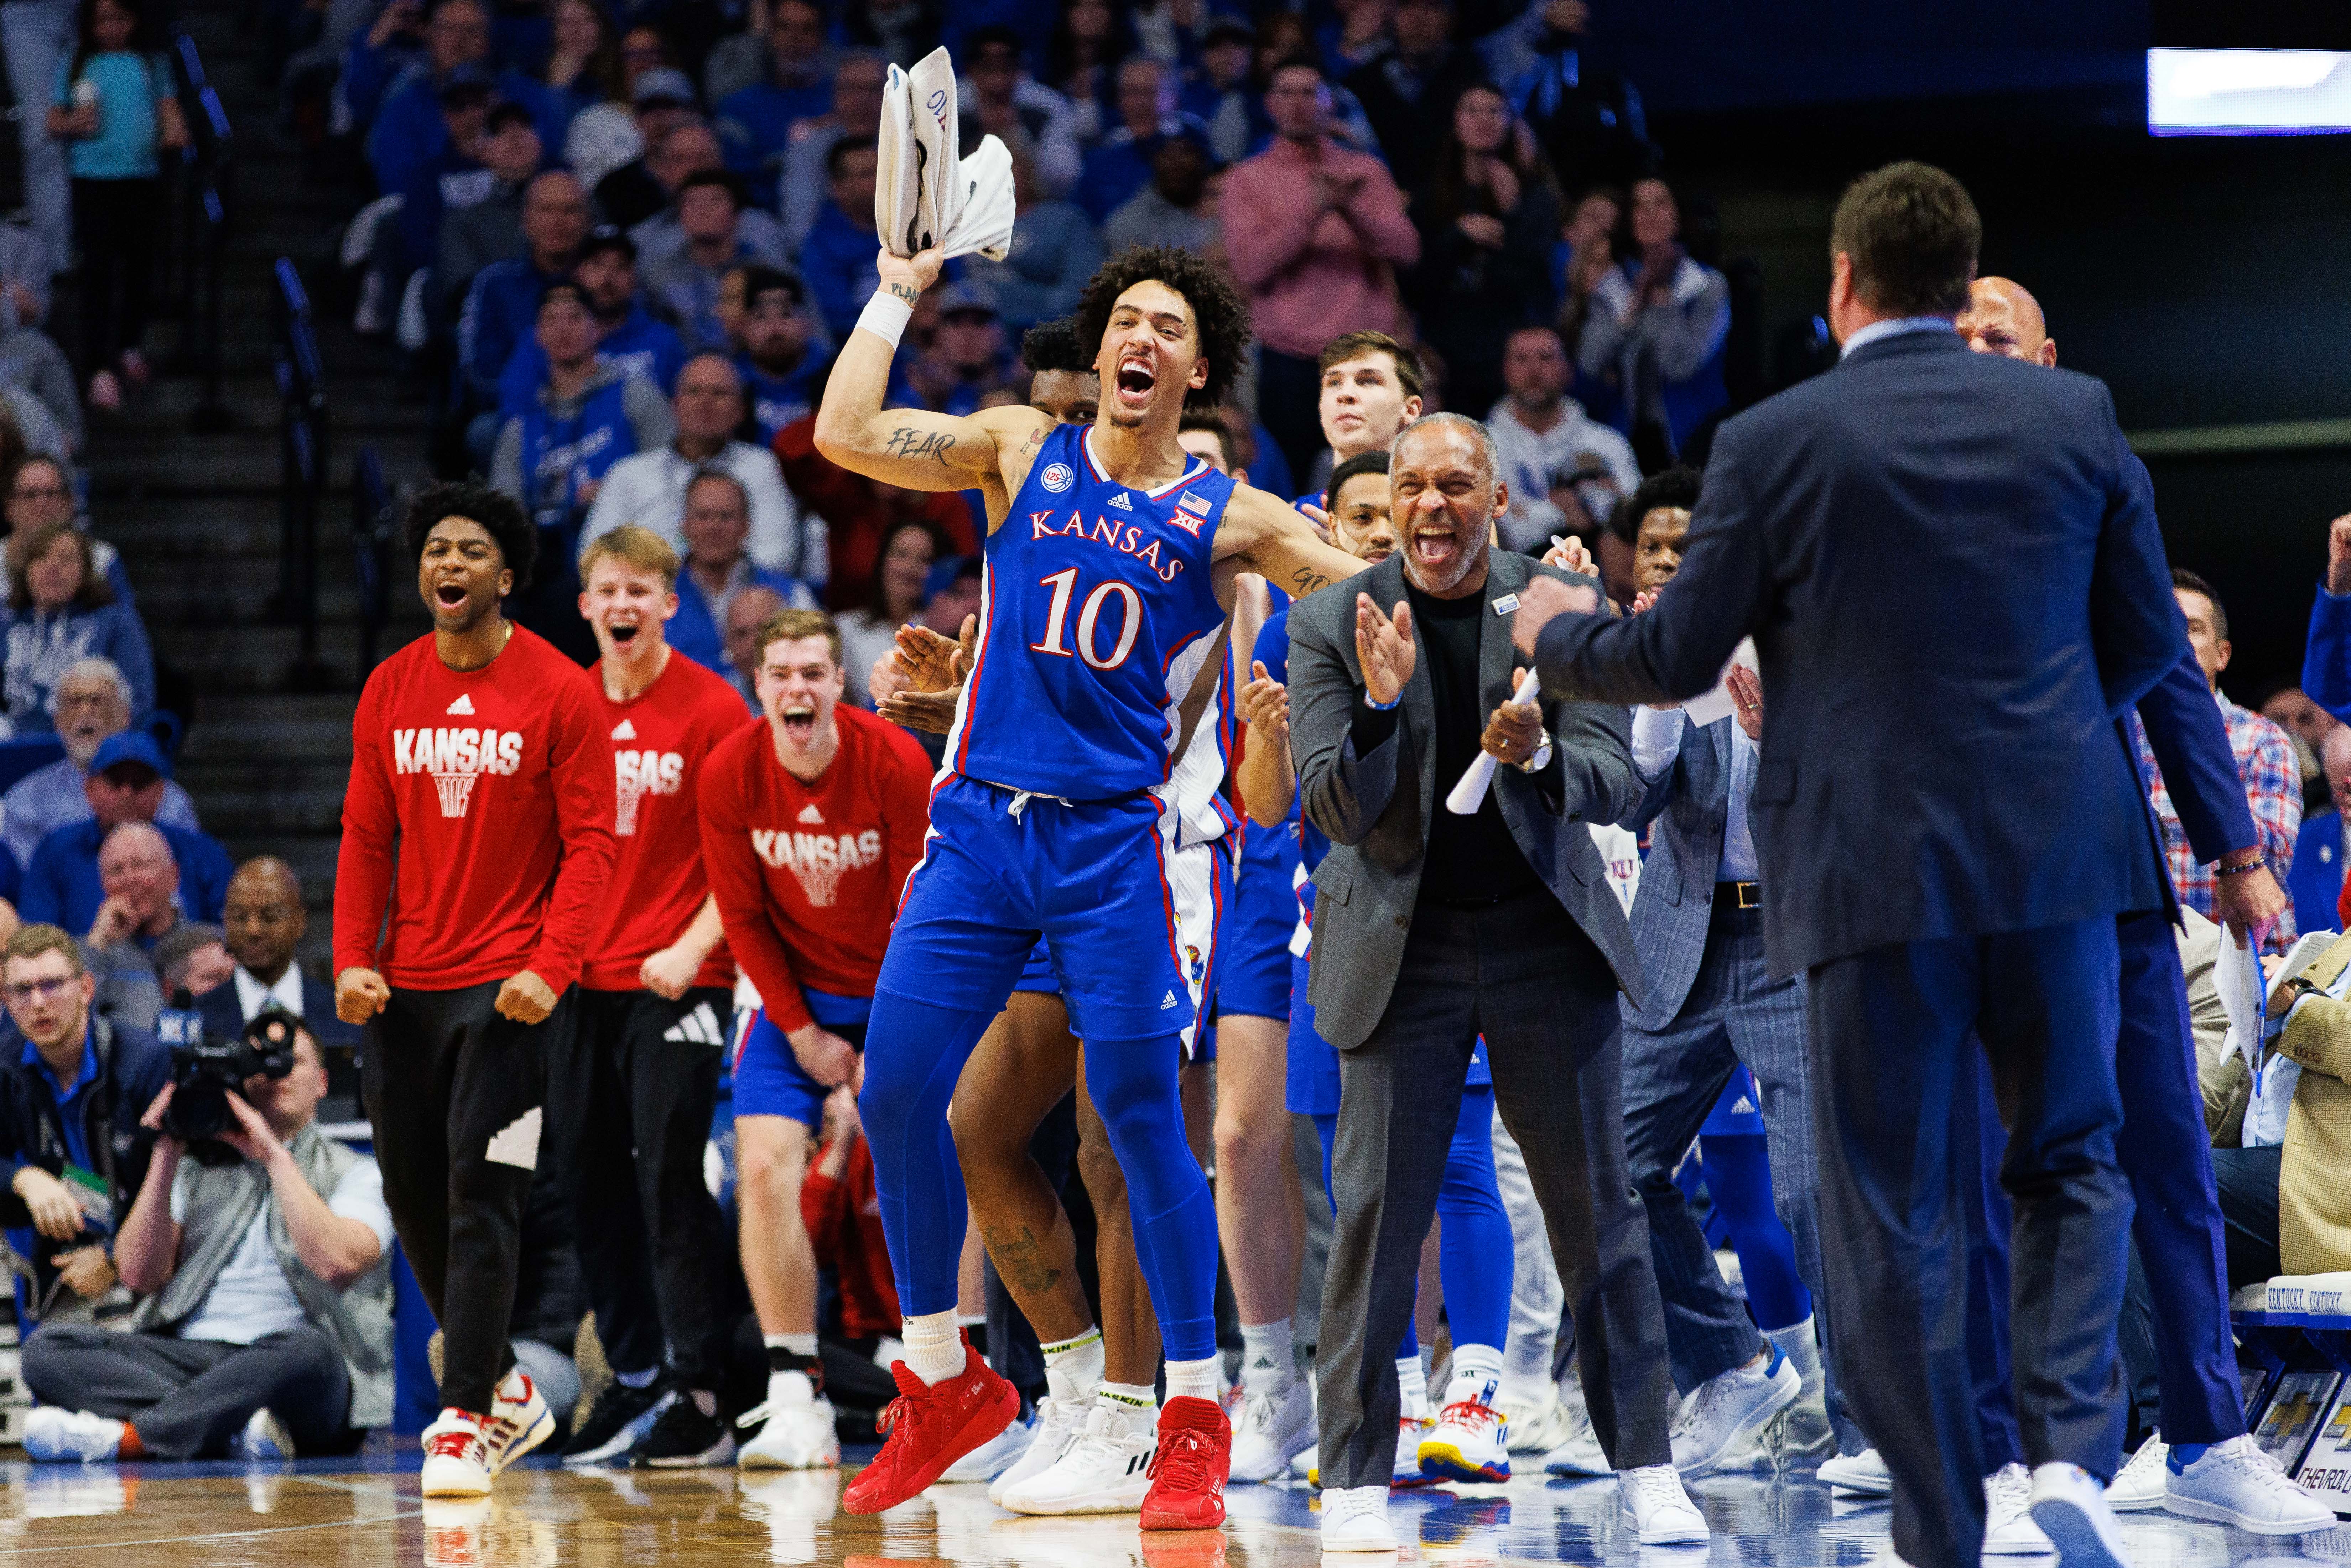 College basketball's weekend winners and losers headlined by Big 12 success and an Alabama flop